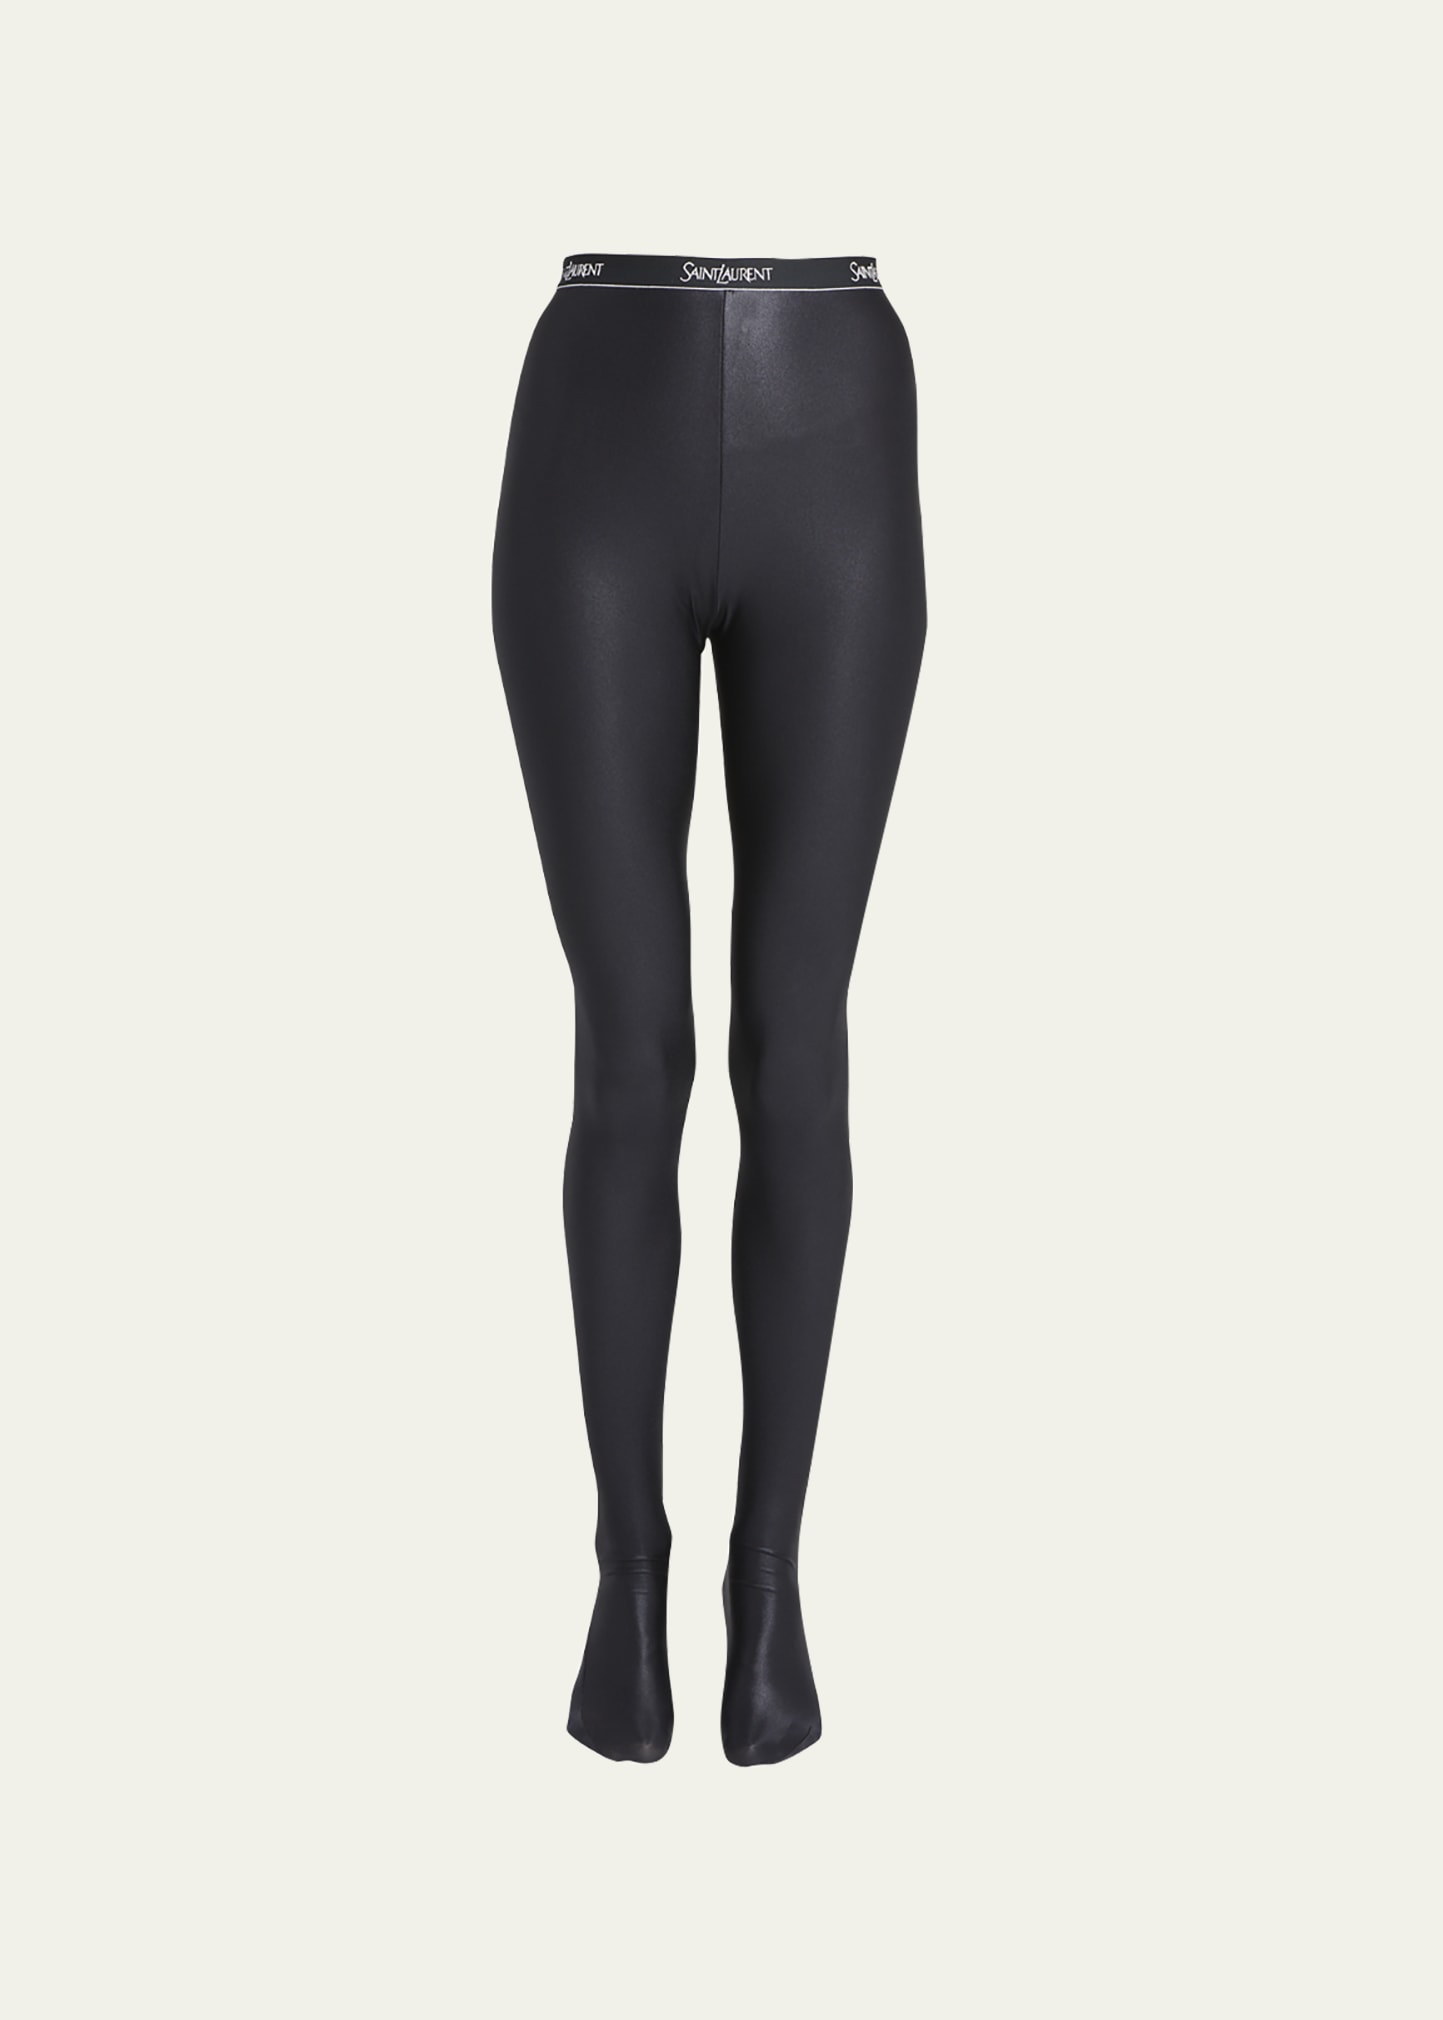 Matty M Women's Leggings with Pockets (Small, Black) at  Women's  Clothing store